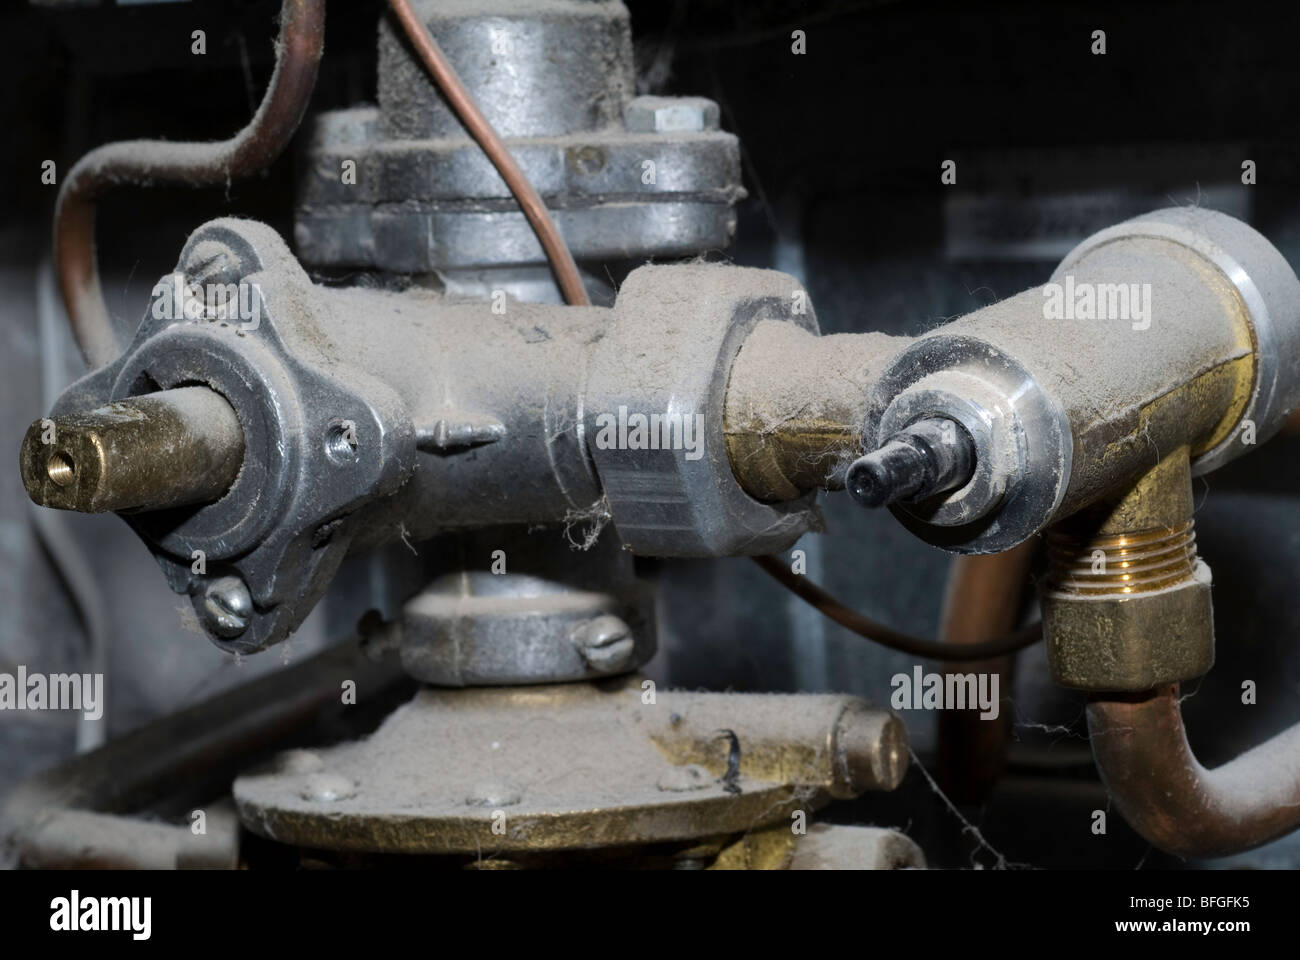 Old Dusty Gas Water Heater Inside View Stock Photo 26793737 Alamy